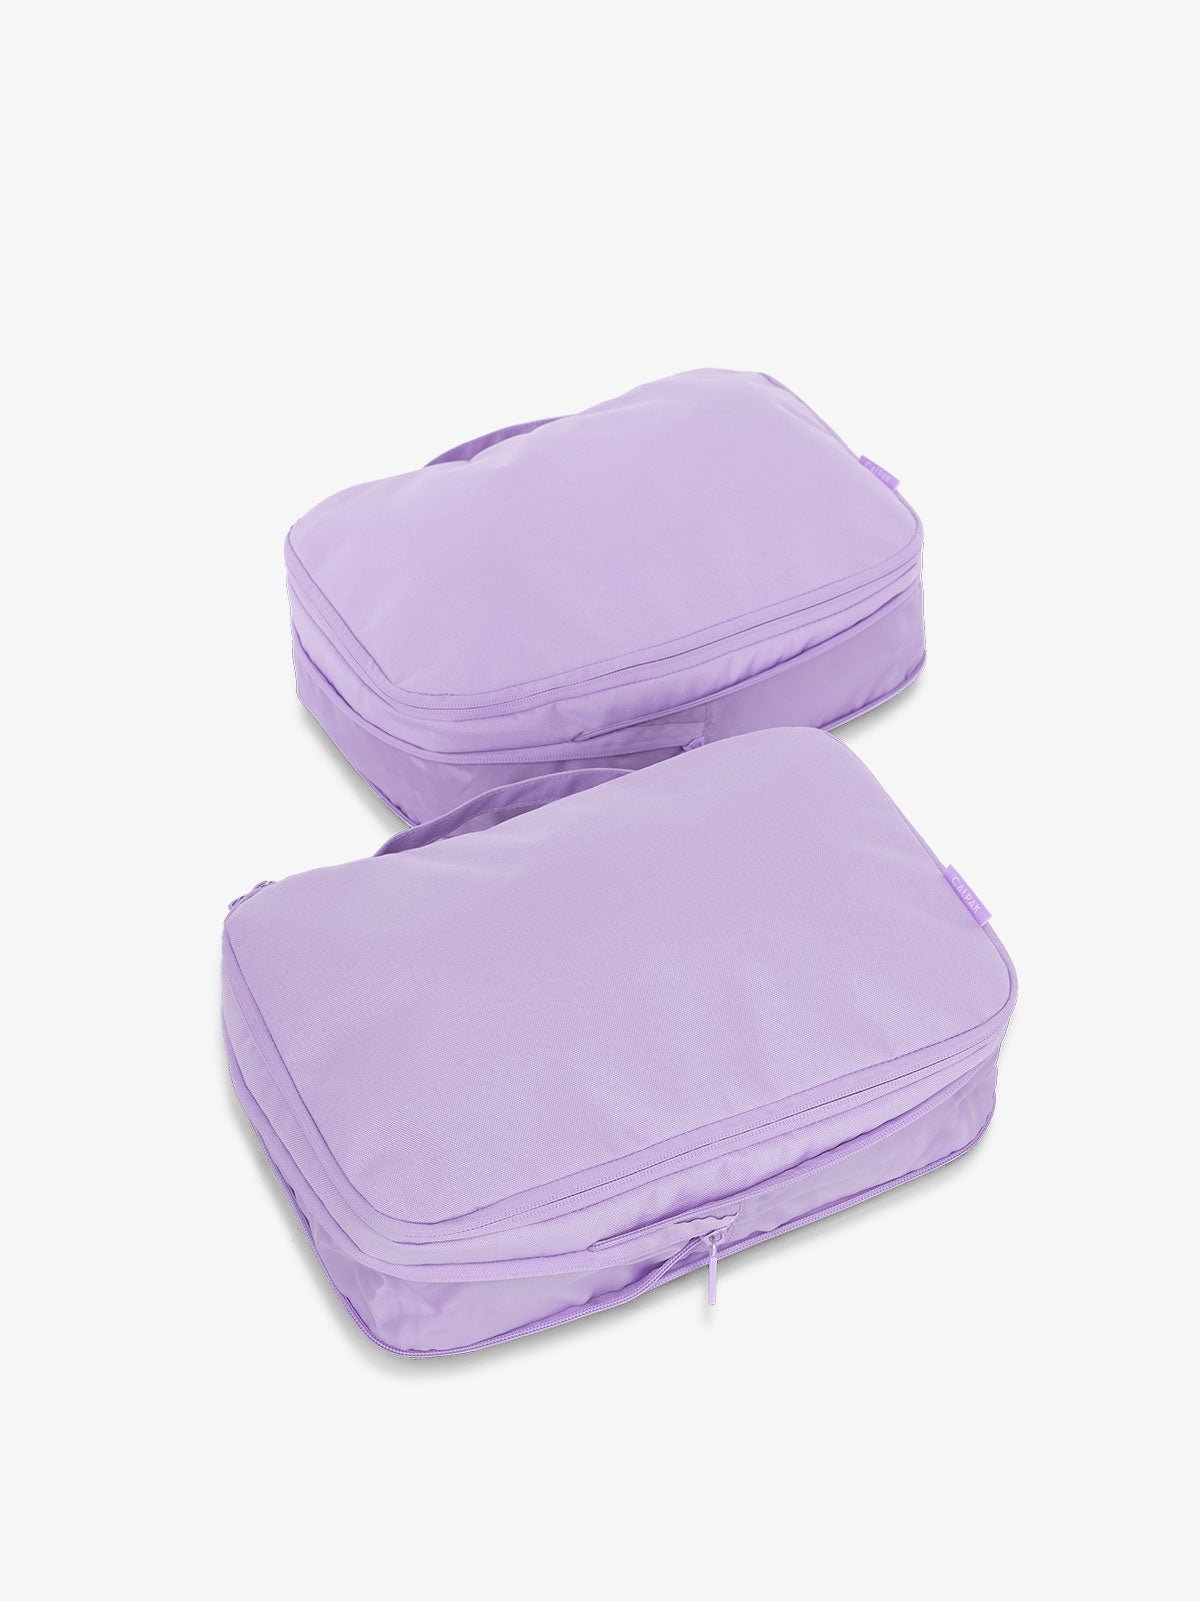 CALPAK compression packing cubes with handles in orchid purple